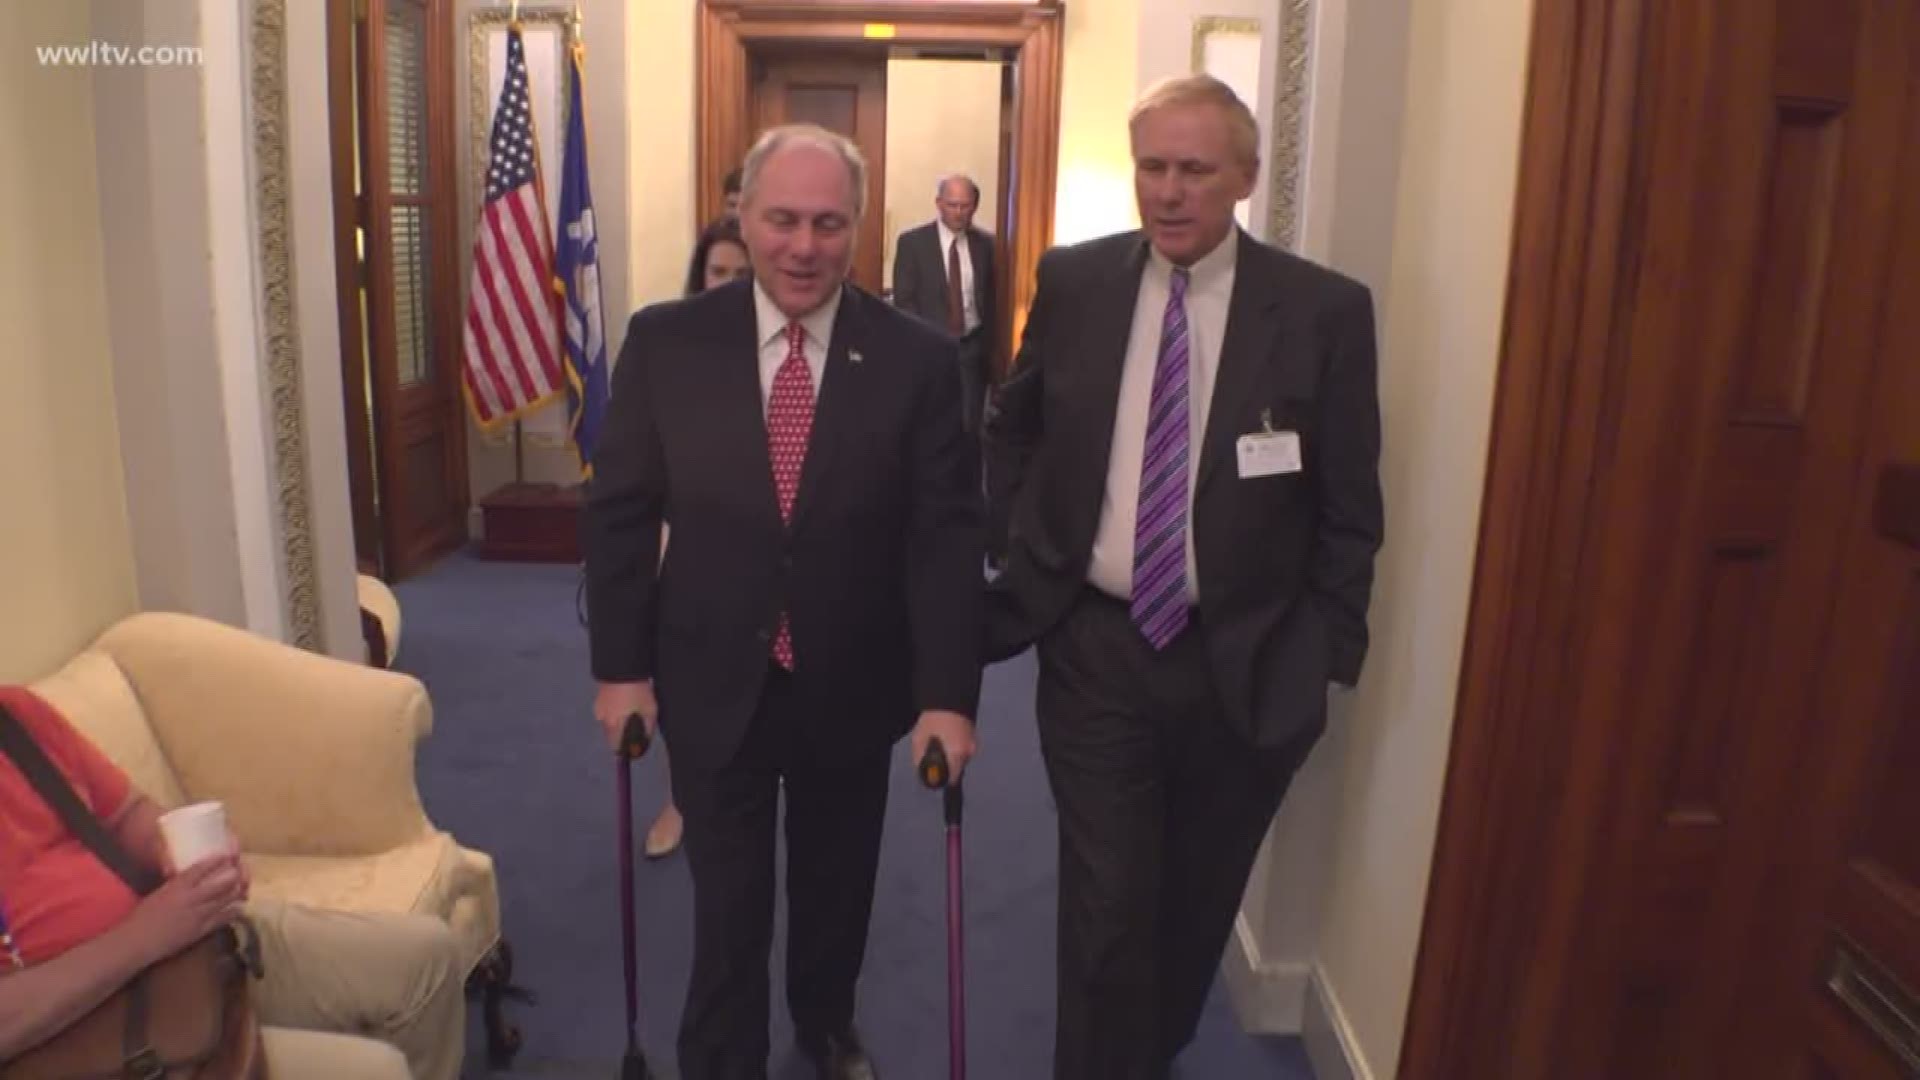 Scalise has made remarkable progress in his recovery from a gunshot wound that almost took his life during a Republican baseball practice last summer.